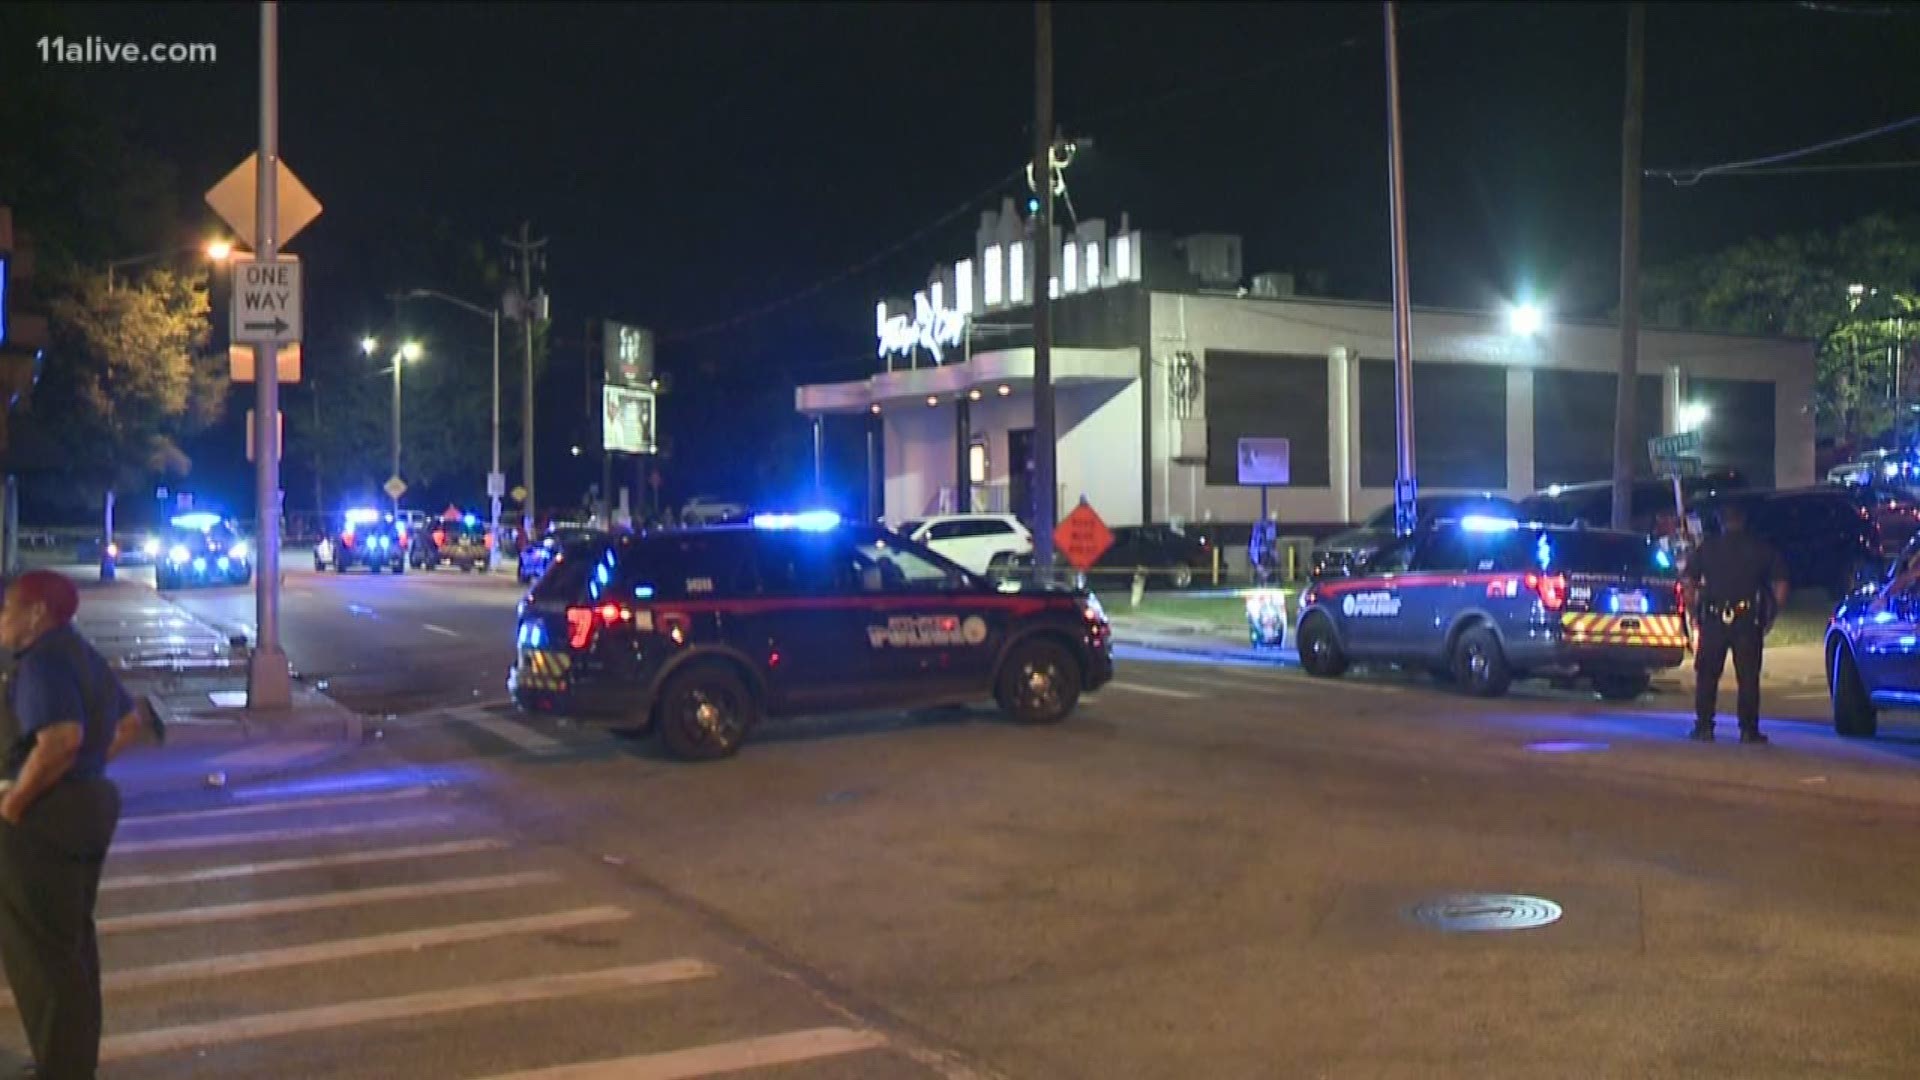 Club security helped detain the suspect as police arrived.